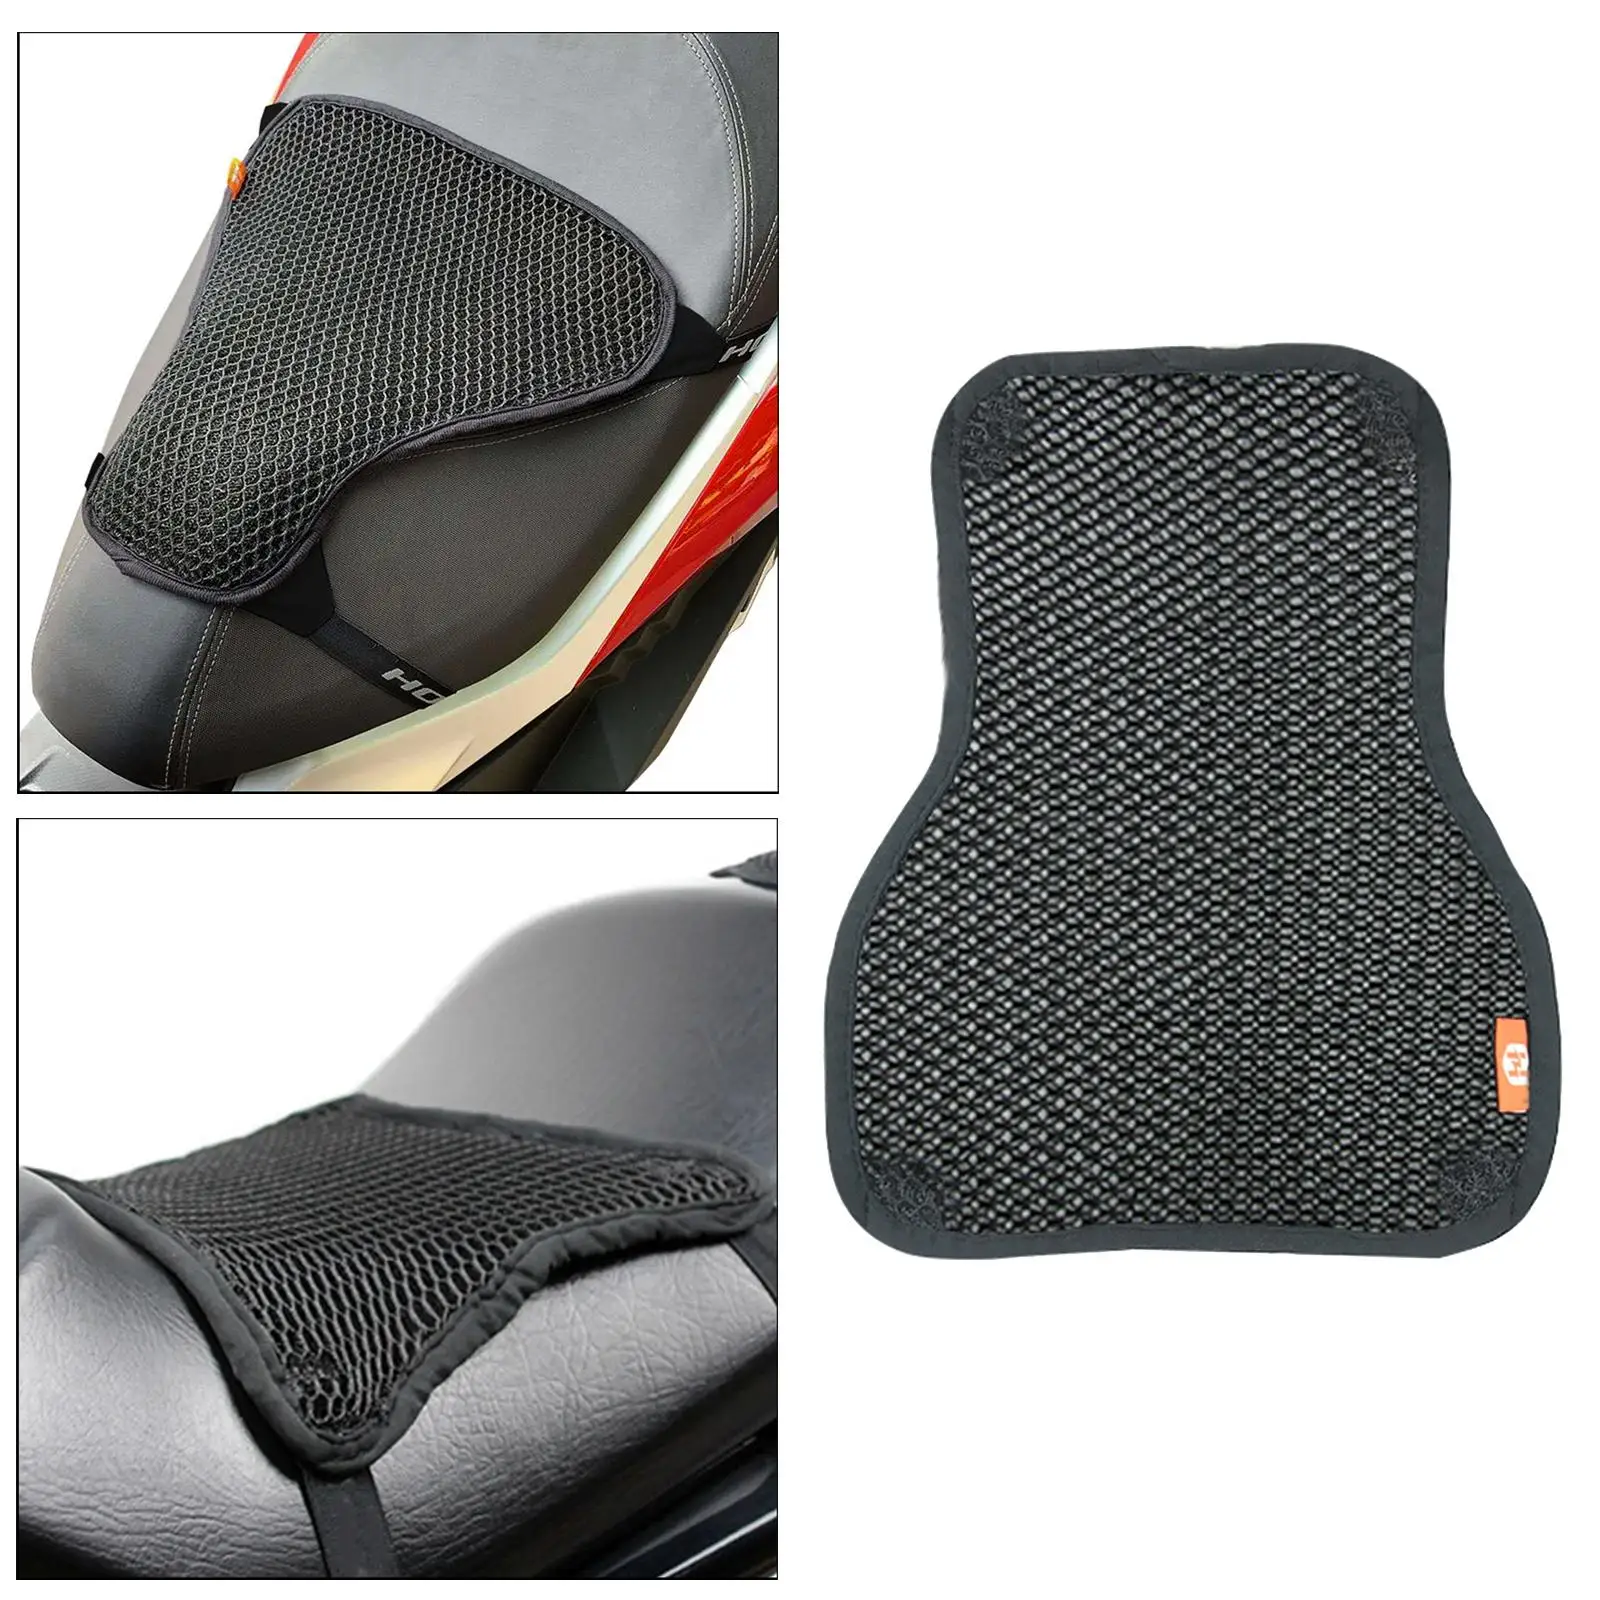 Motorcycle Seat Cushion Pad Breathable Reduces Pressure and Fatigue Sport